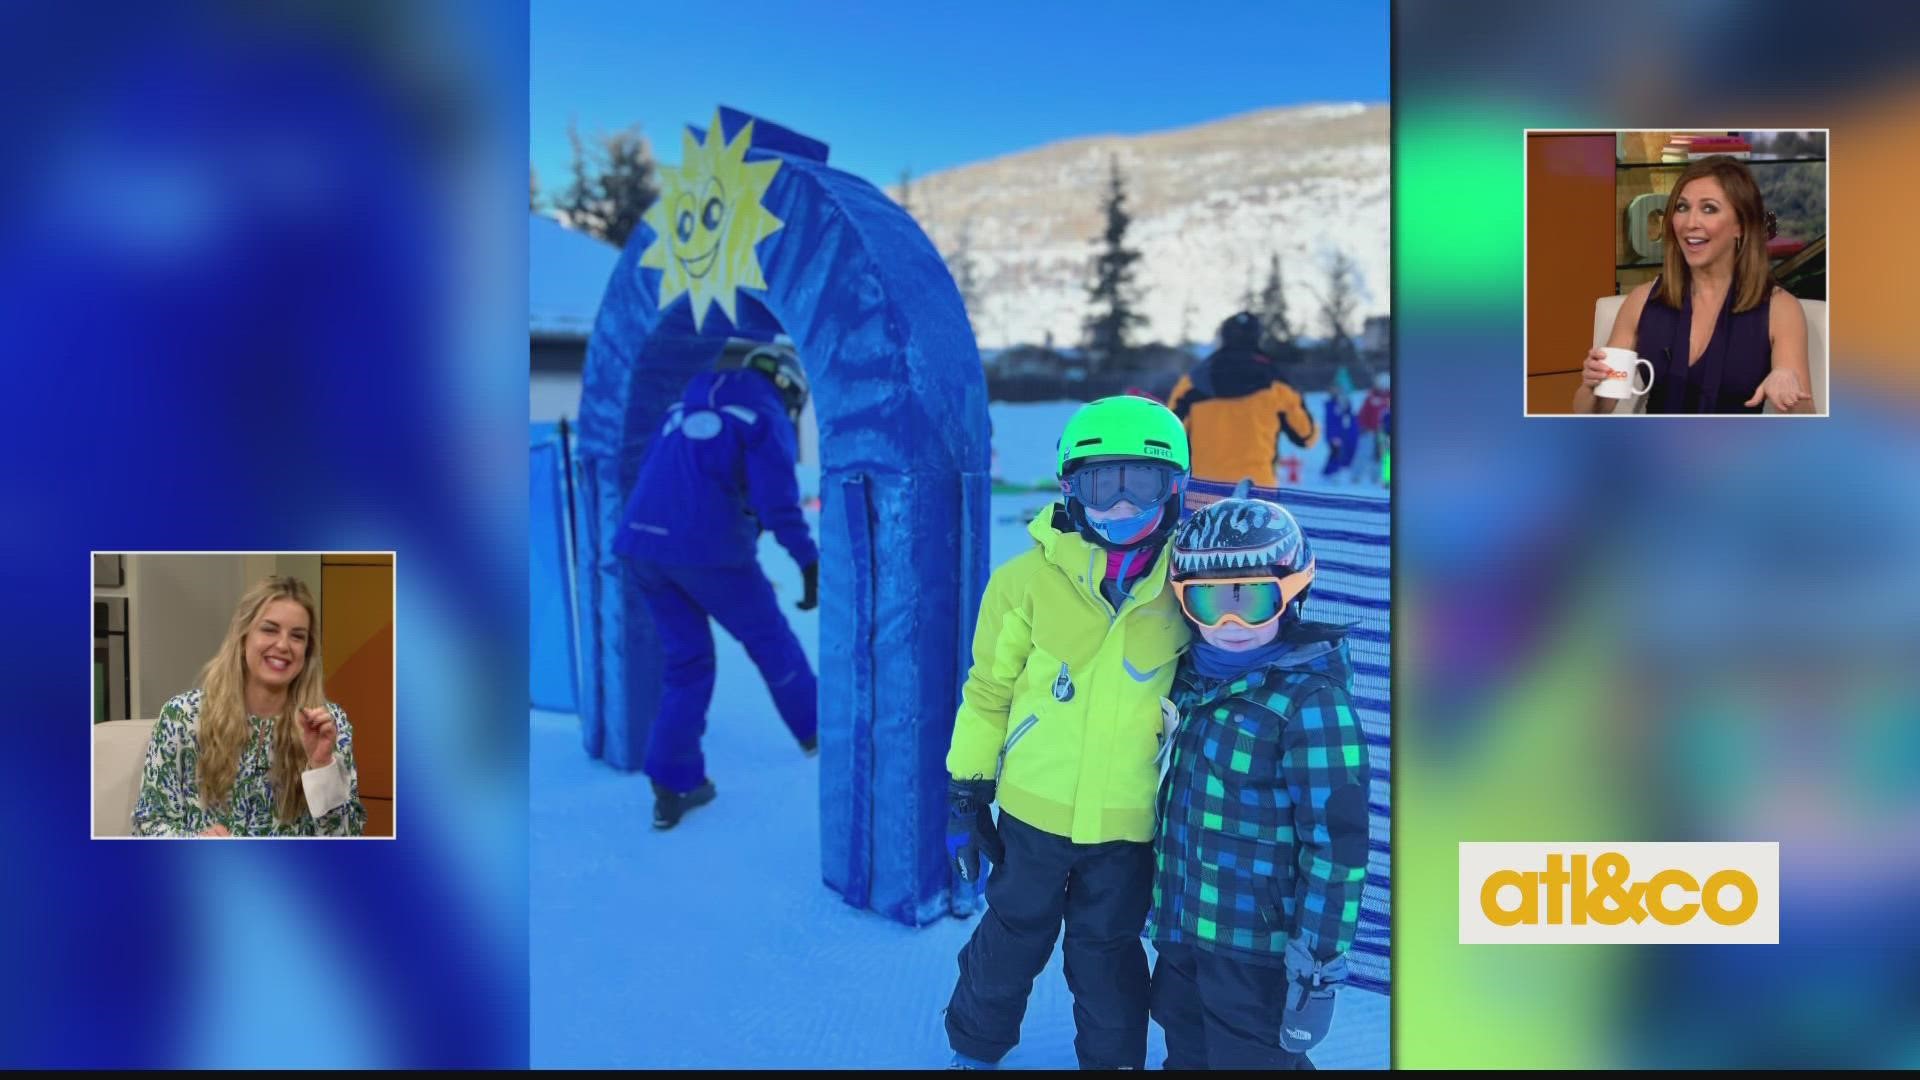 Cara and husband Lee took the kids on their first family ski trip.